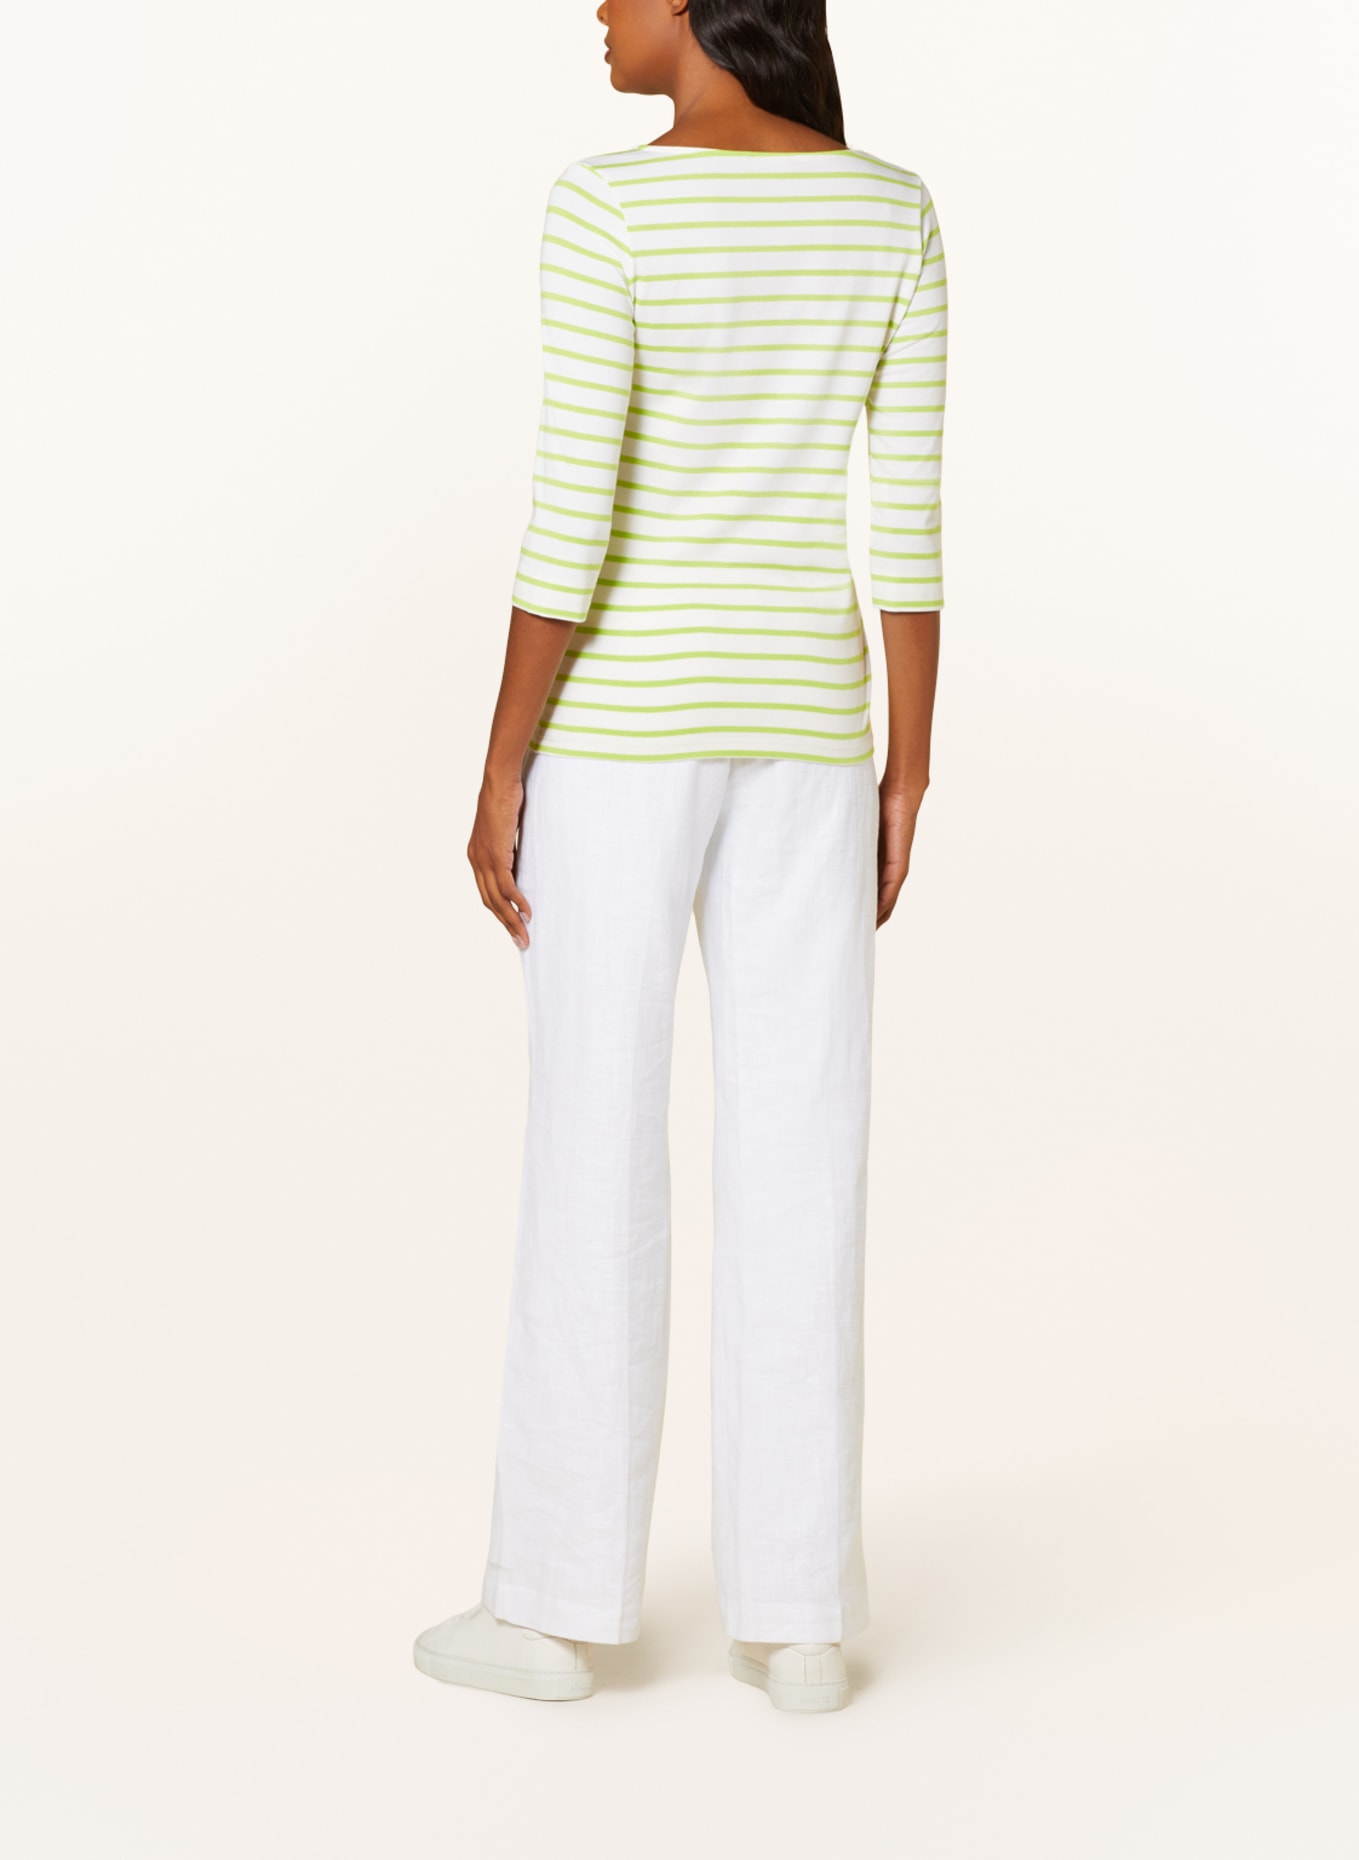 darling harbour Shirt with 3/4 sleeves, Color: WEISS/LIMETTENGRÜN (Image 3)